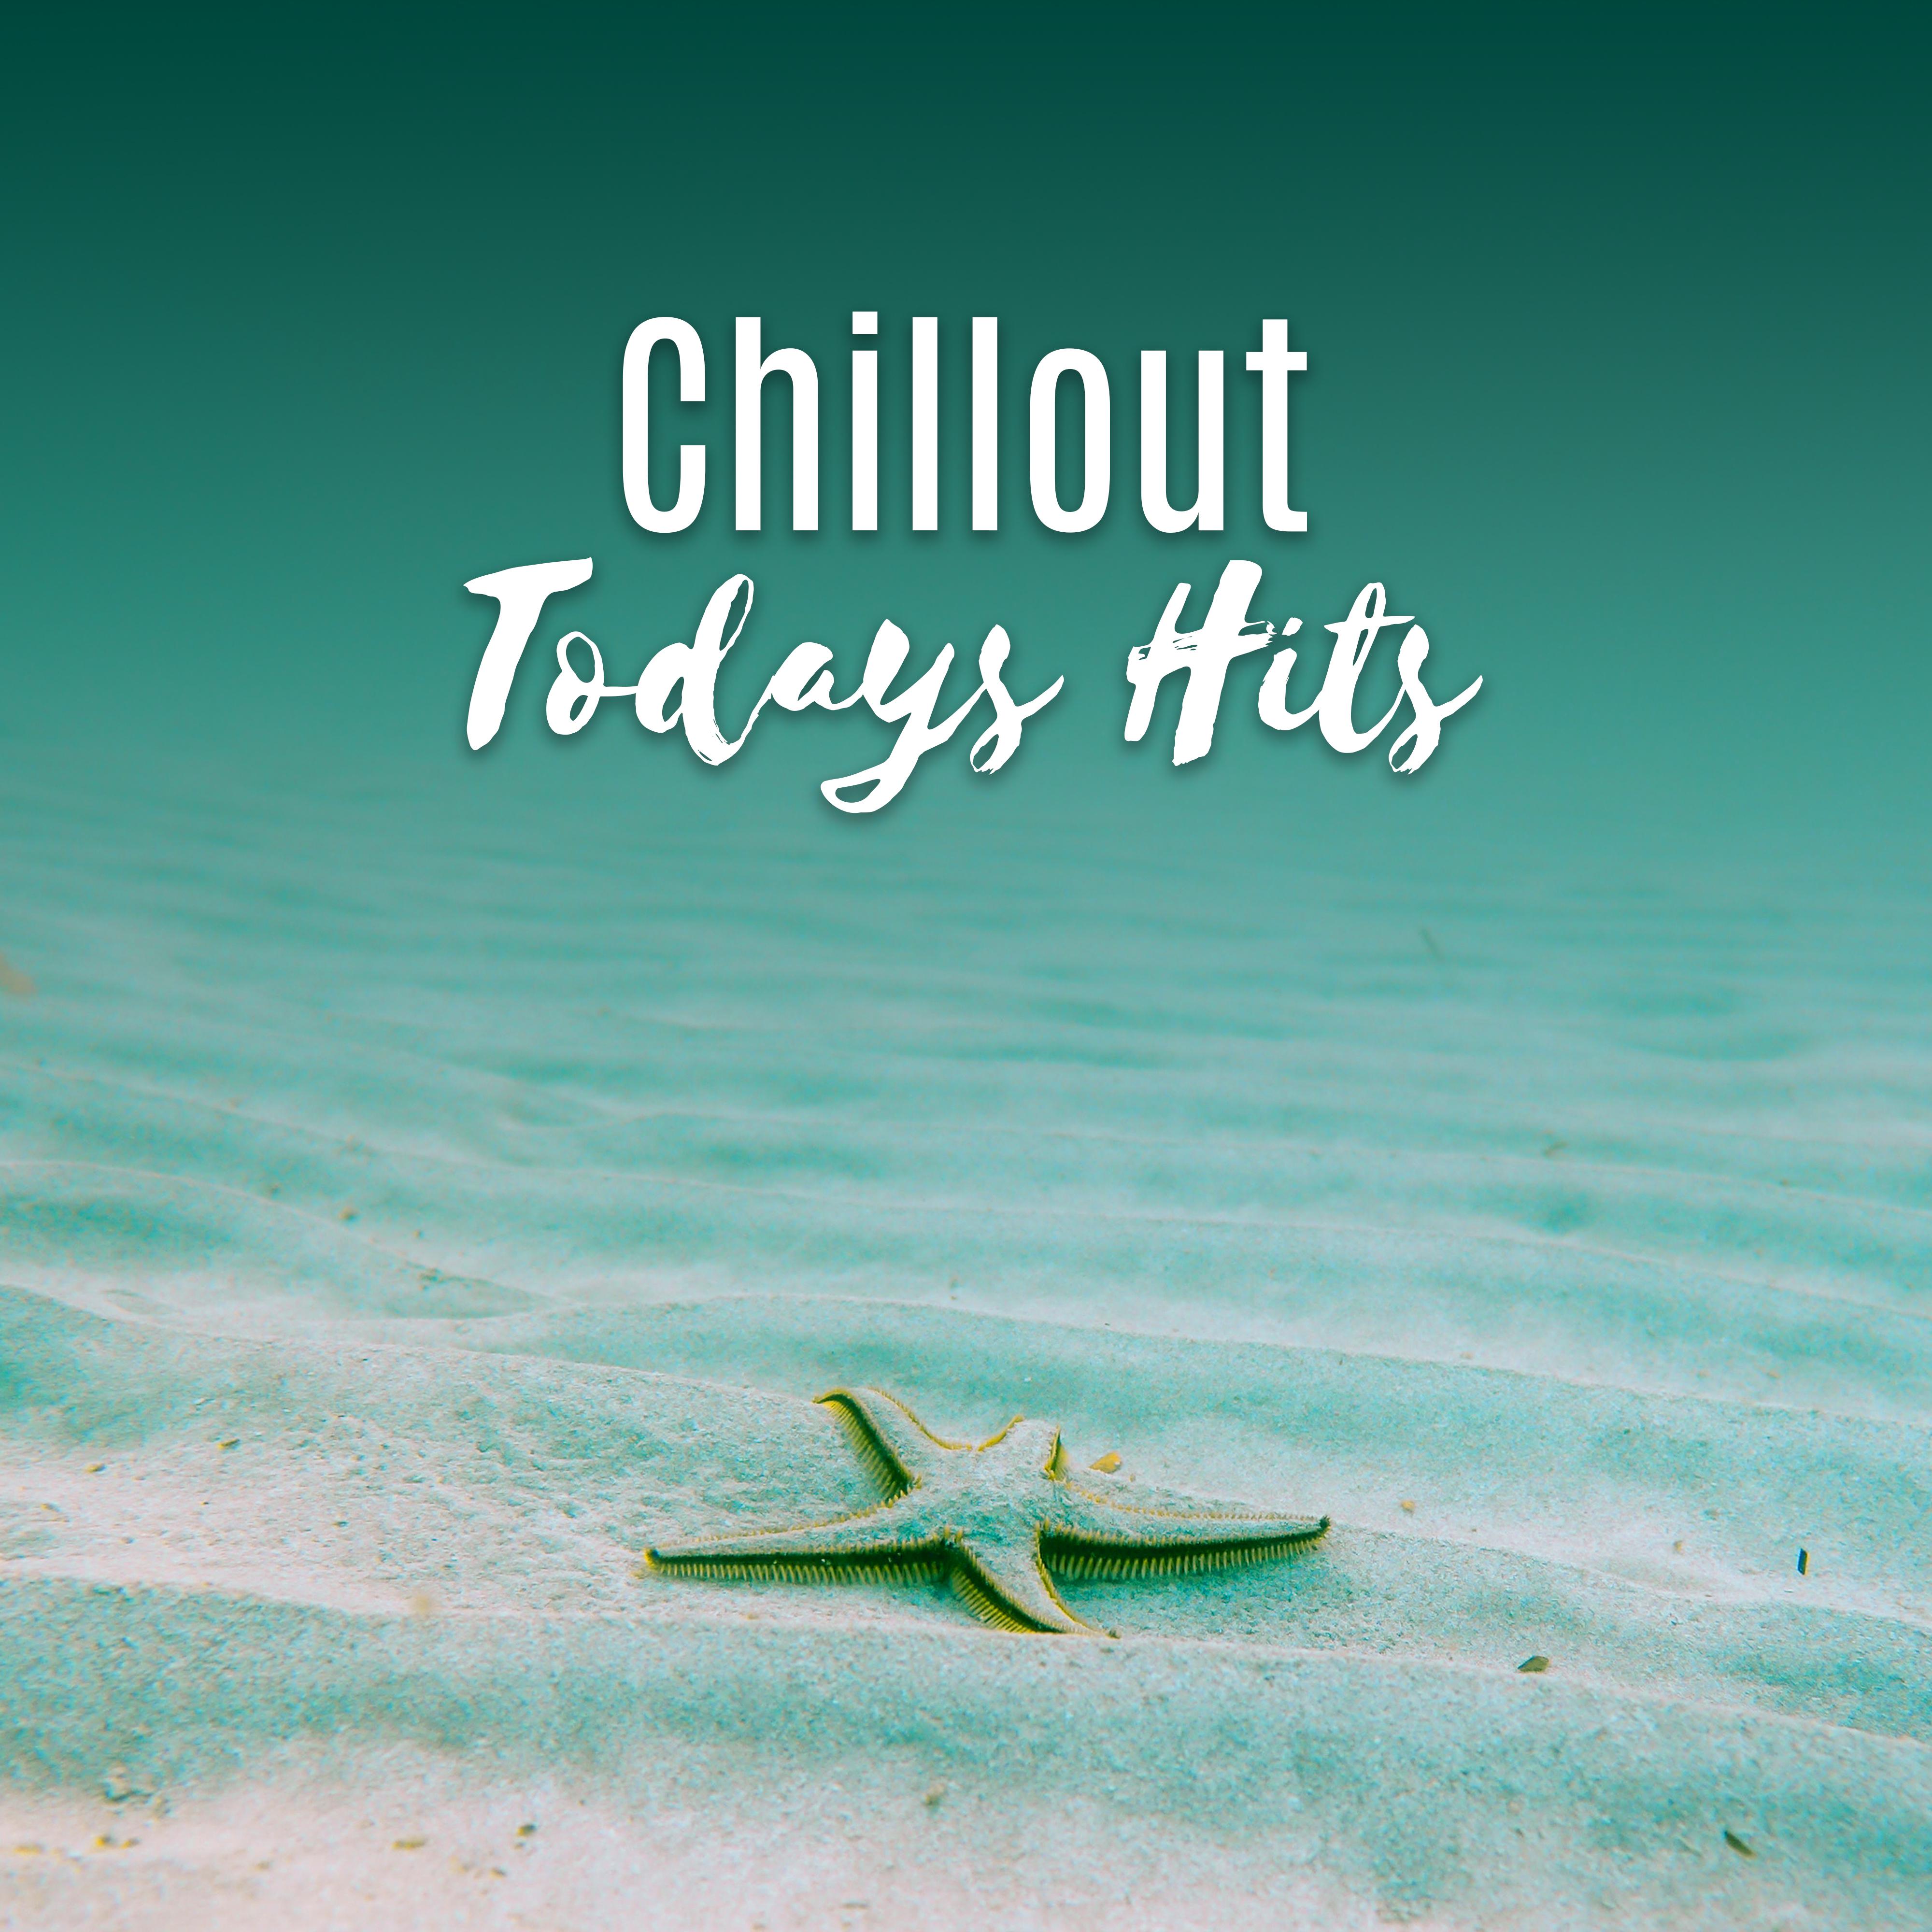 Chillout Todays Hits – Relax & Chill, Summer Hits, Chill Out Music, Ibiza 2017